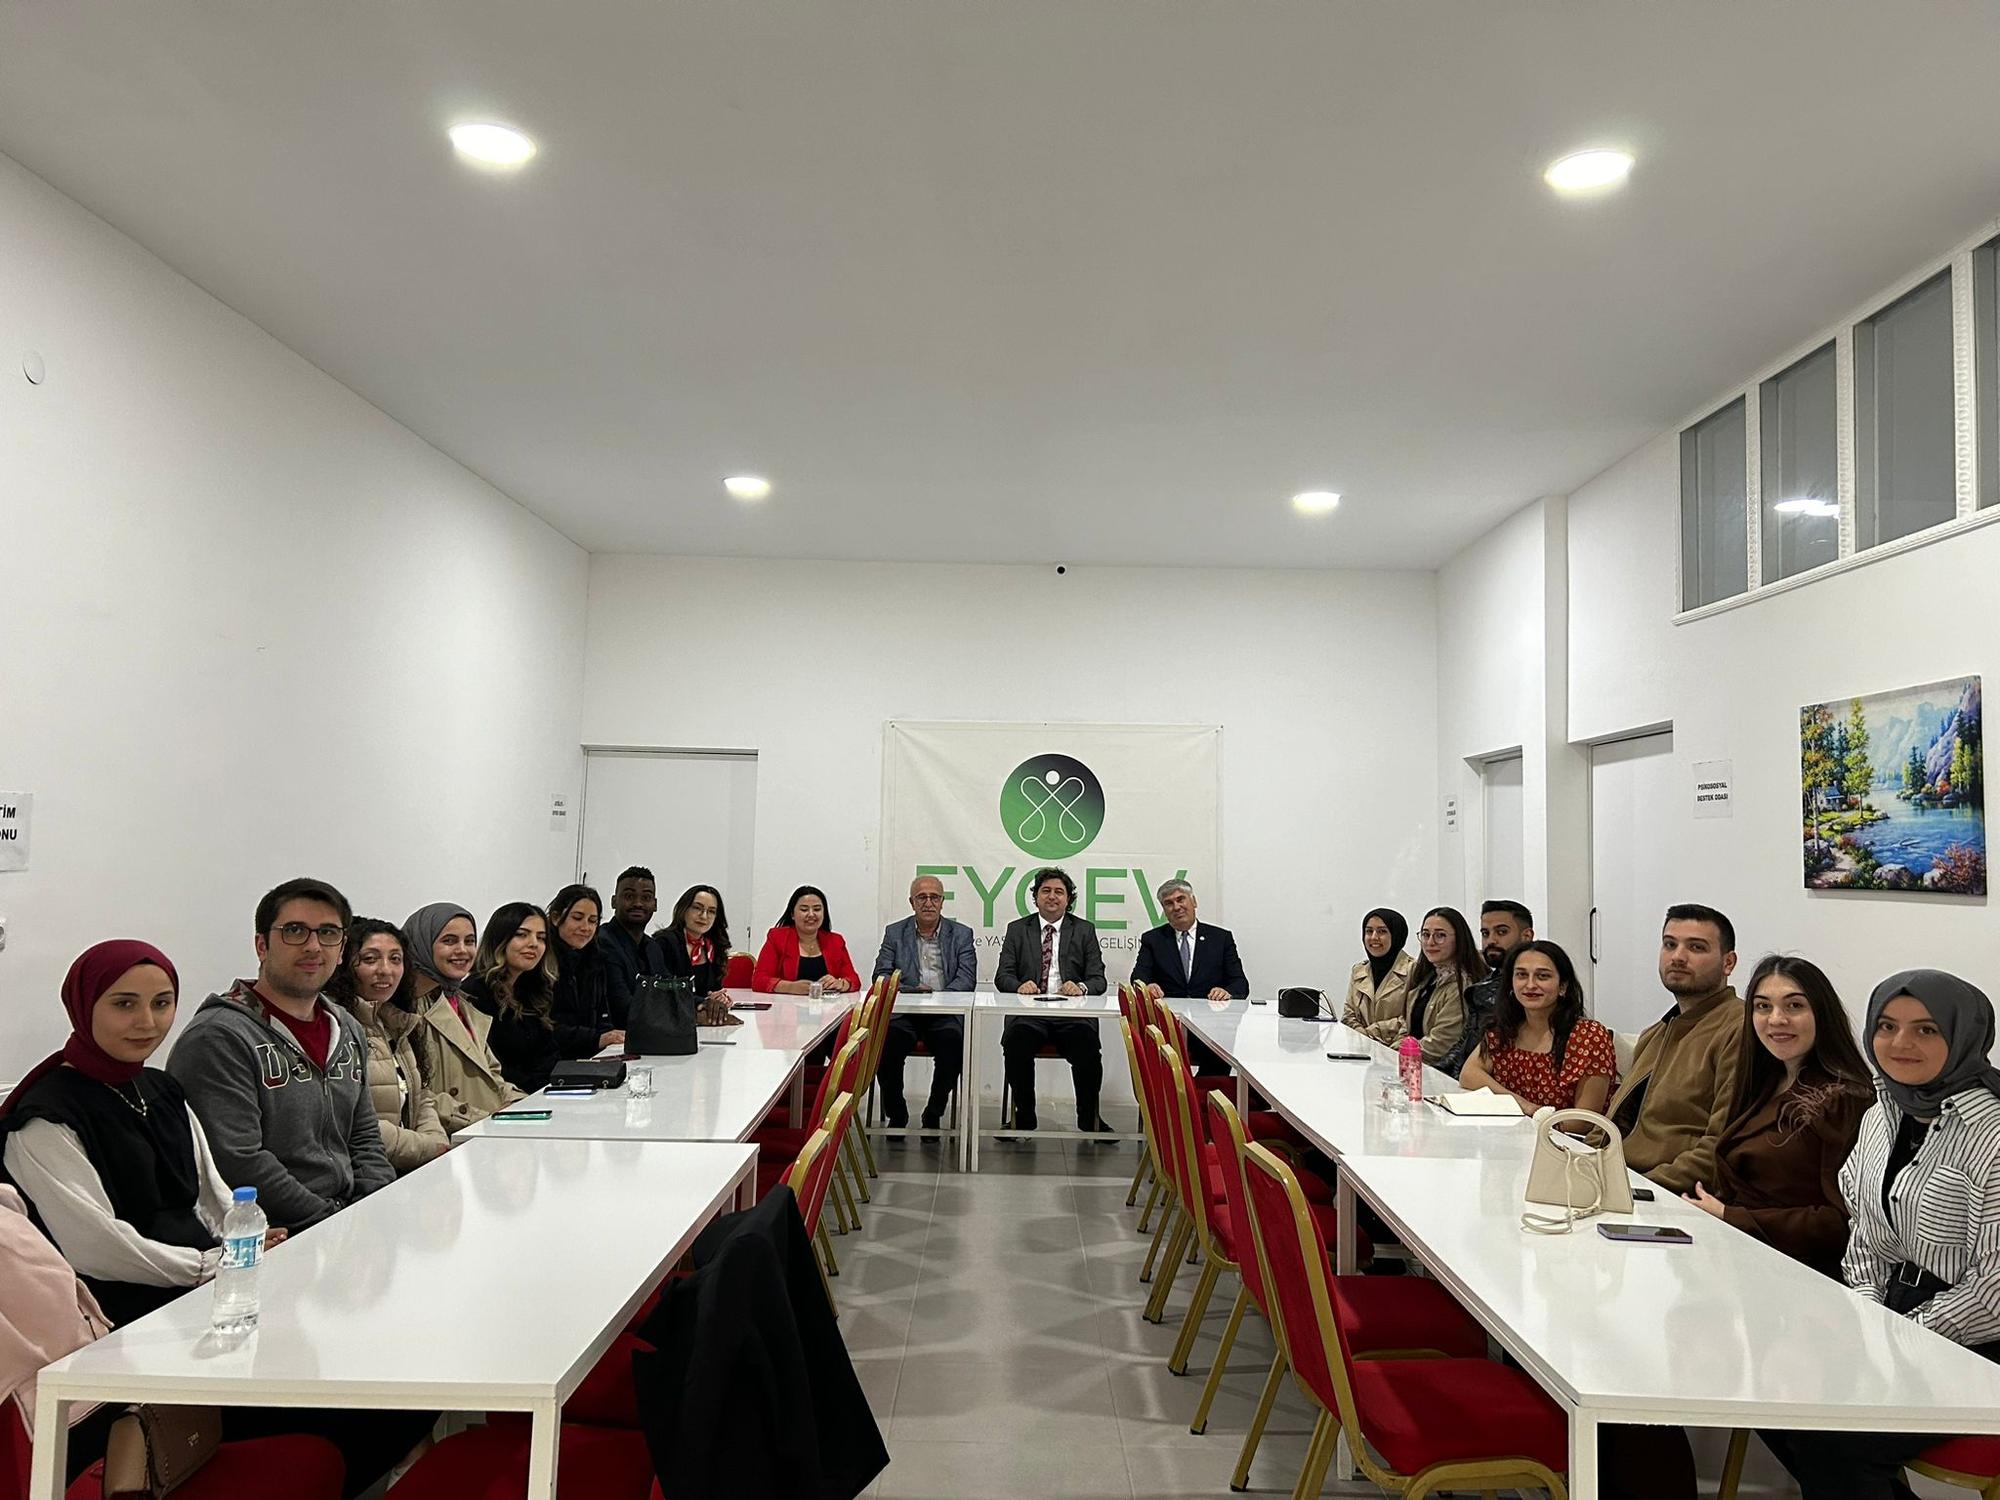 ÜLKÜ GROUP CARE CENTERS SITUATION ASSESSMENT MEETING HAS BEEN COMPLETED